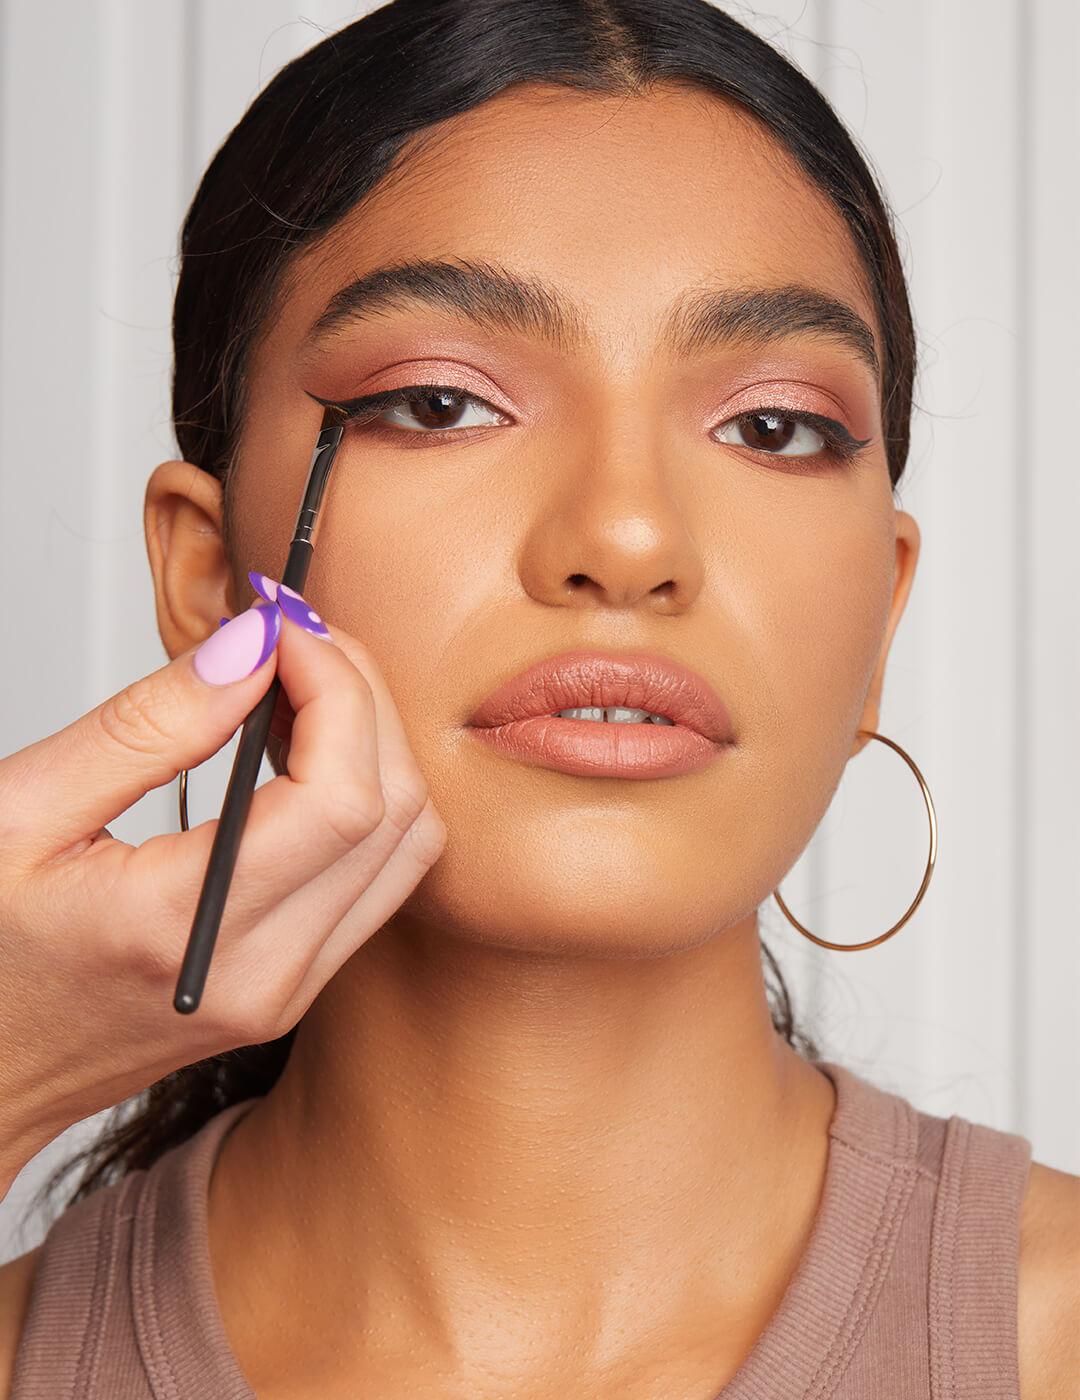 Makeup artist creating a winged eyeliner look on a model using a makeup brush